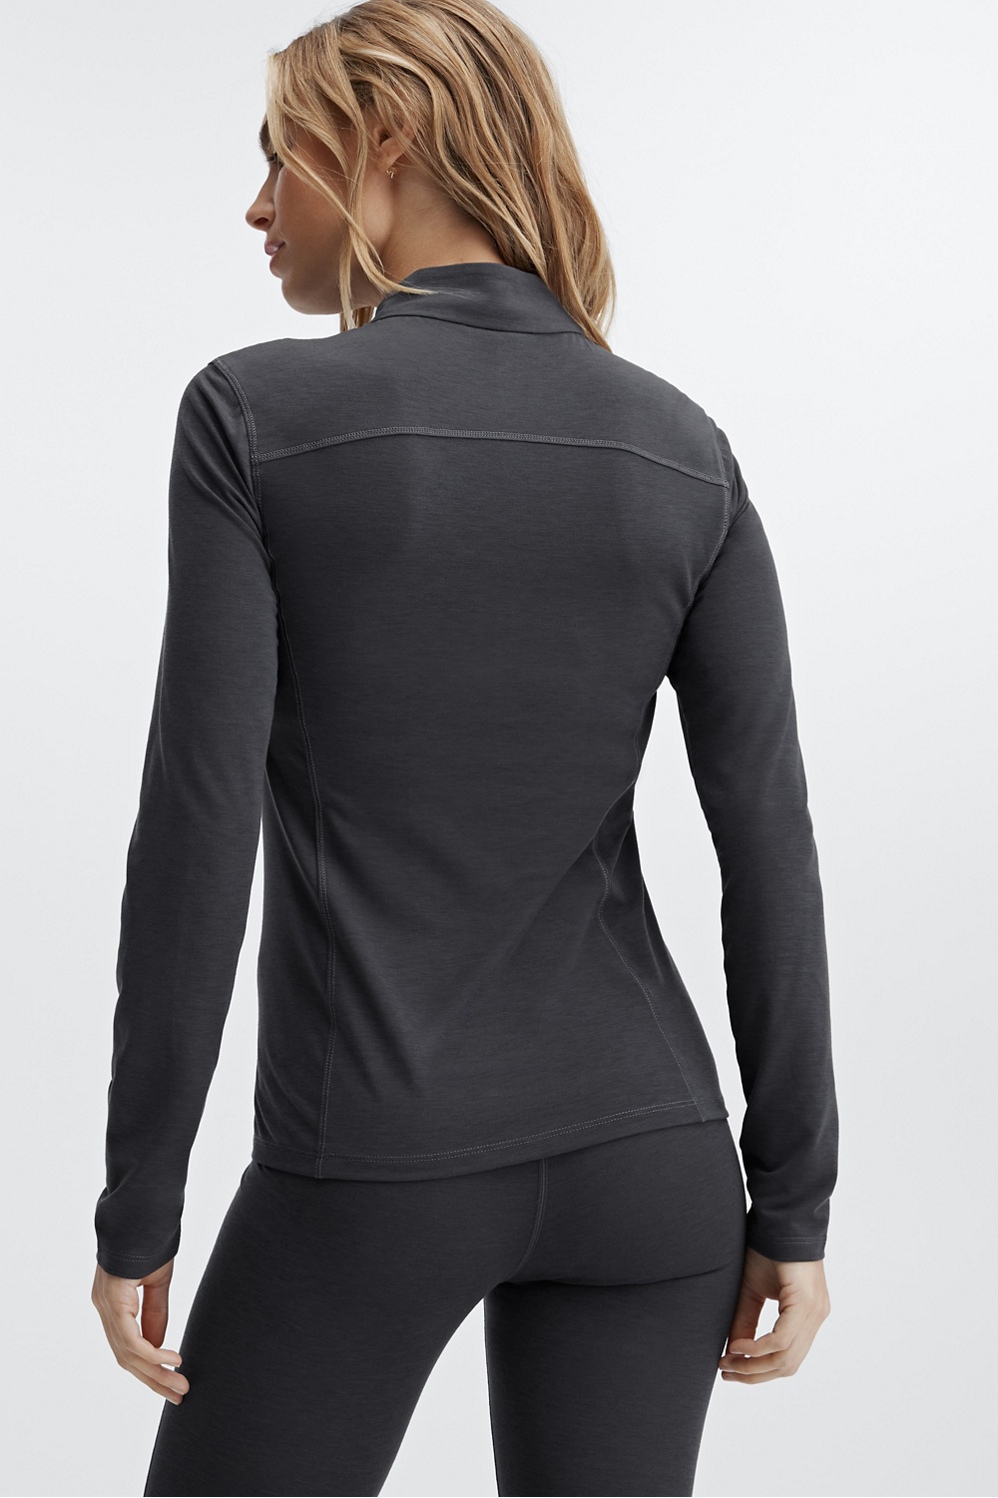 Fabletics, Tops, Fabletics Womens Top Gray L Athletic Sync Long Sleeve Ii  Msrp 4995